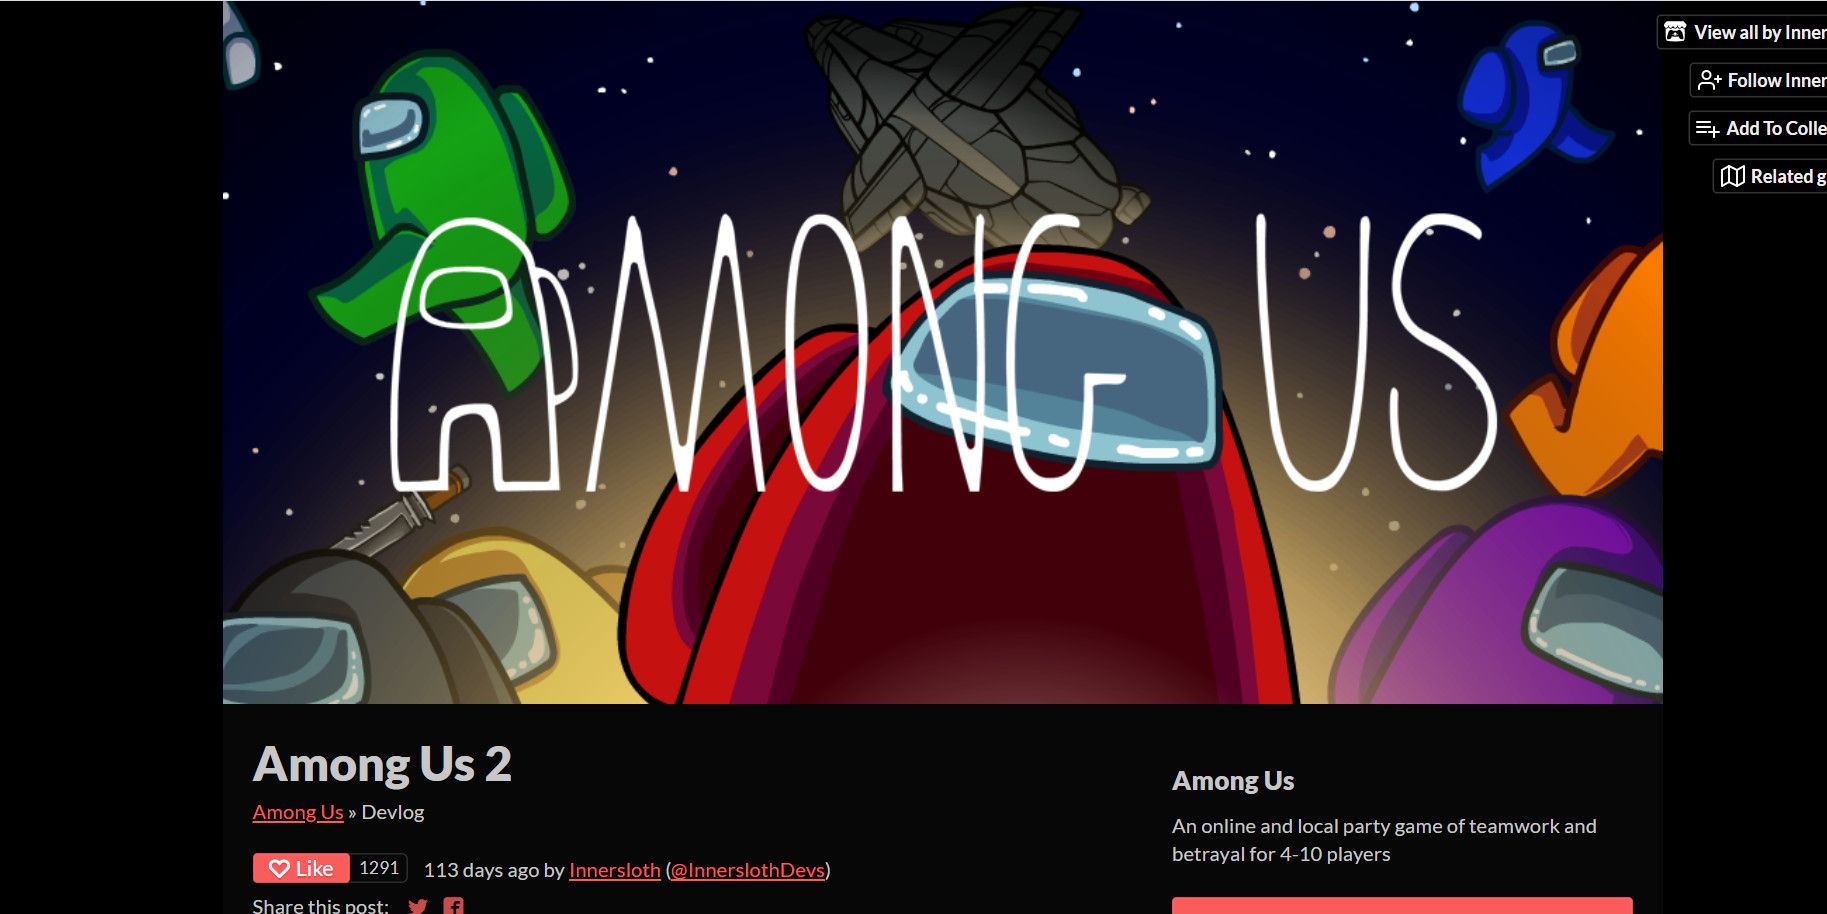 Blog post of the Among Us 2 announcement